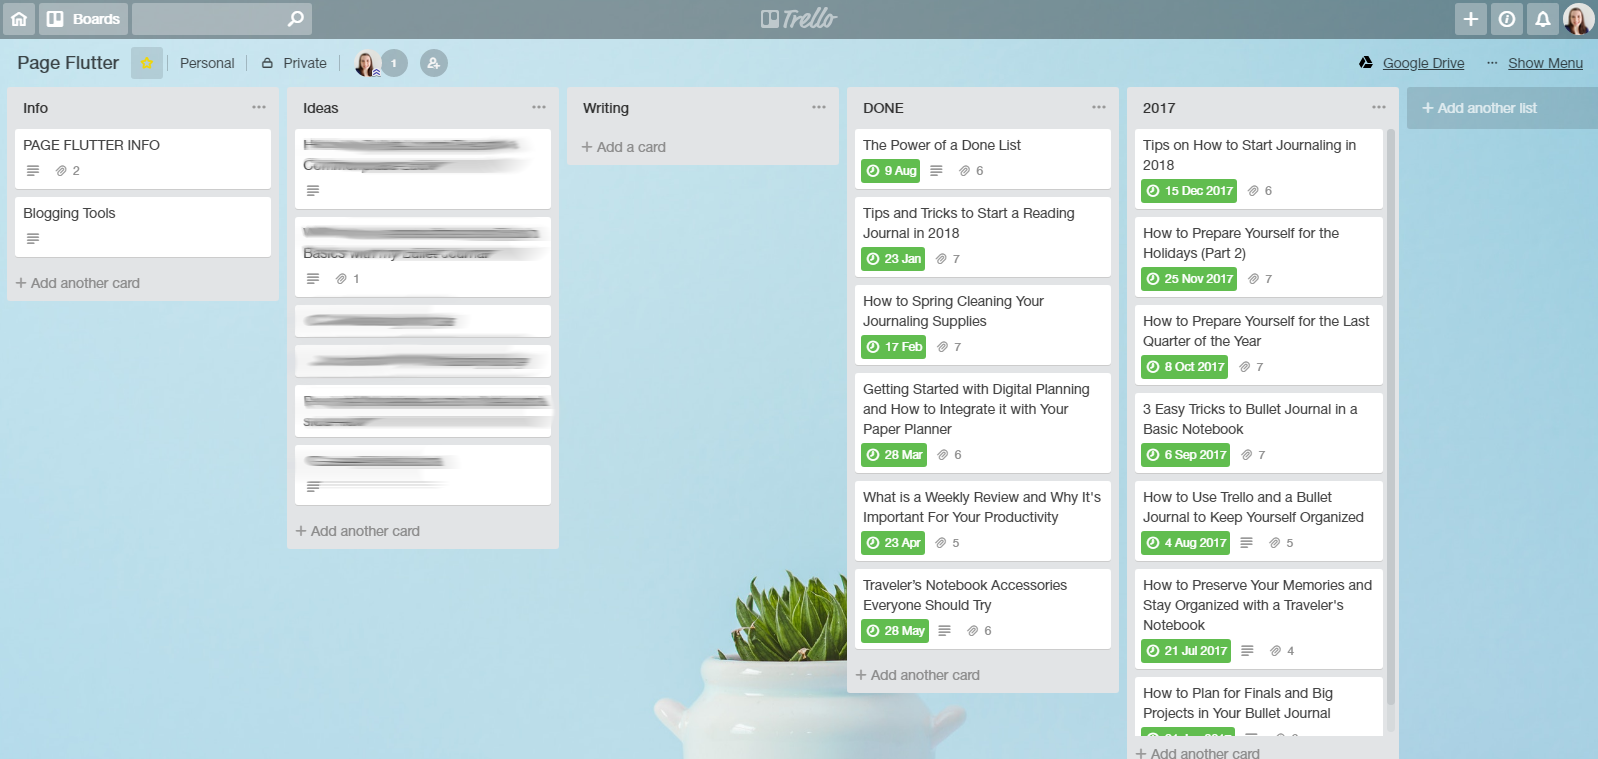 How to Master Your Trello Boards Keep Productive. www.keepproductive.com. 